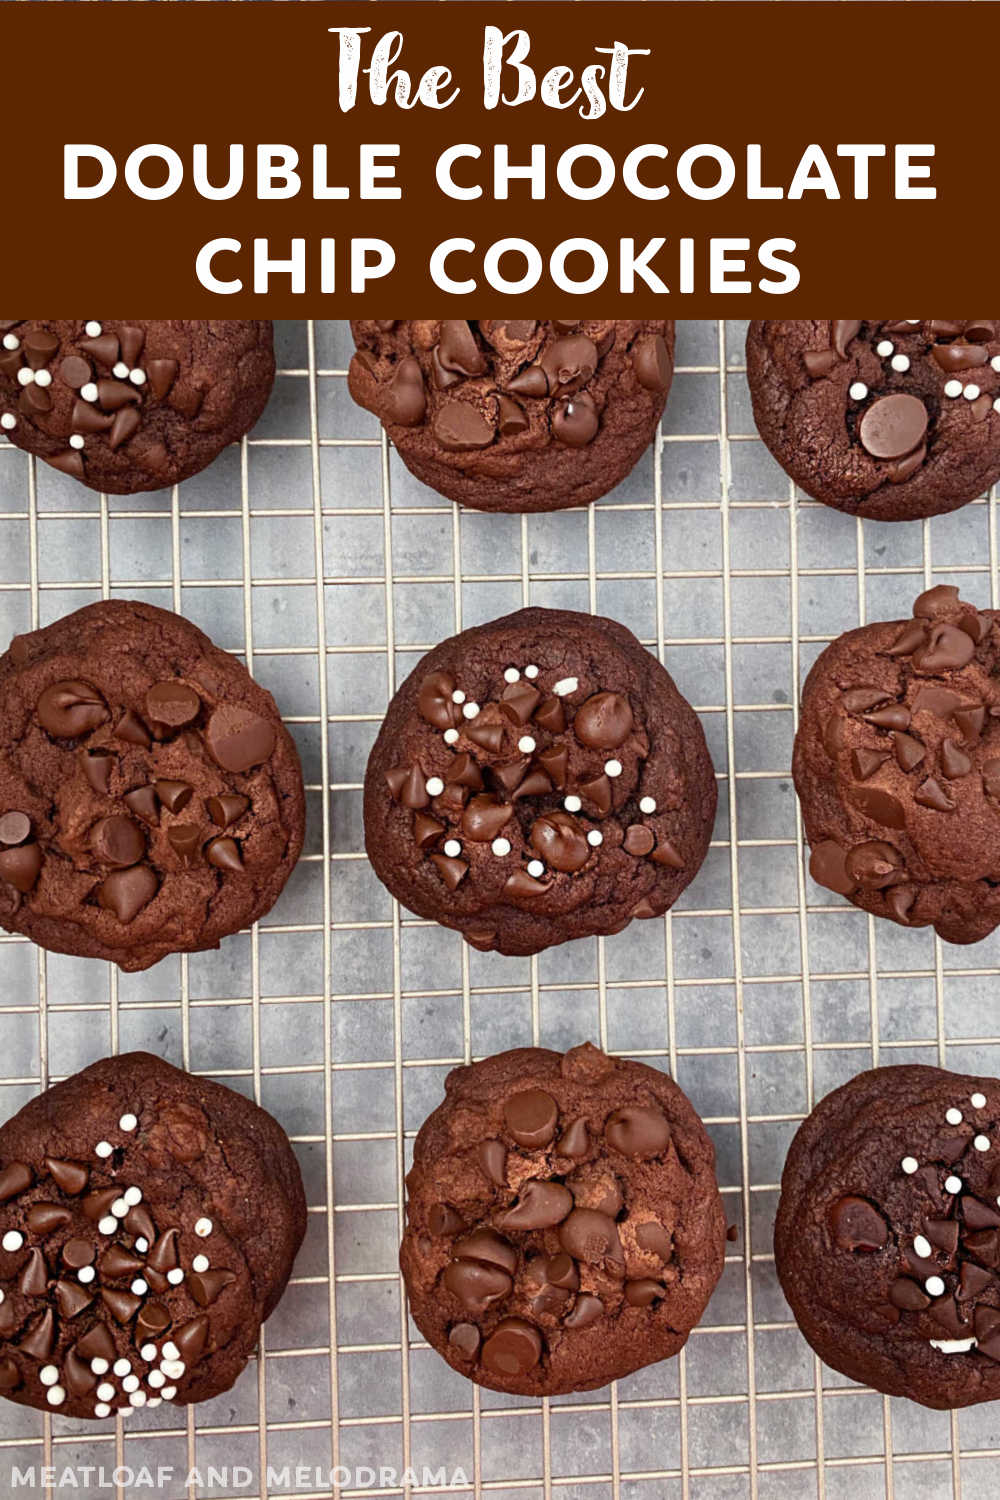 The Best Double Chocolate Chip Cookies with cocoa powder are chewy, fudgy and loaded with chocolate. An easy cookie recipe for chocolate lovers that will definitely satisfy your chocolate cravings! via @meamel